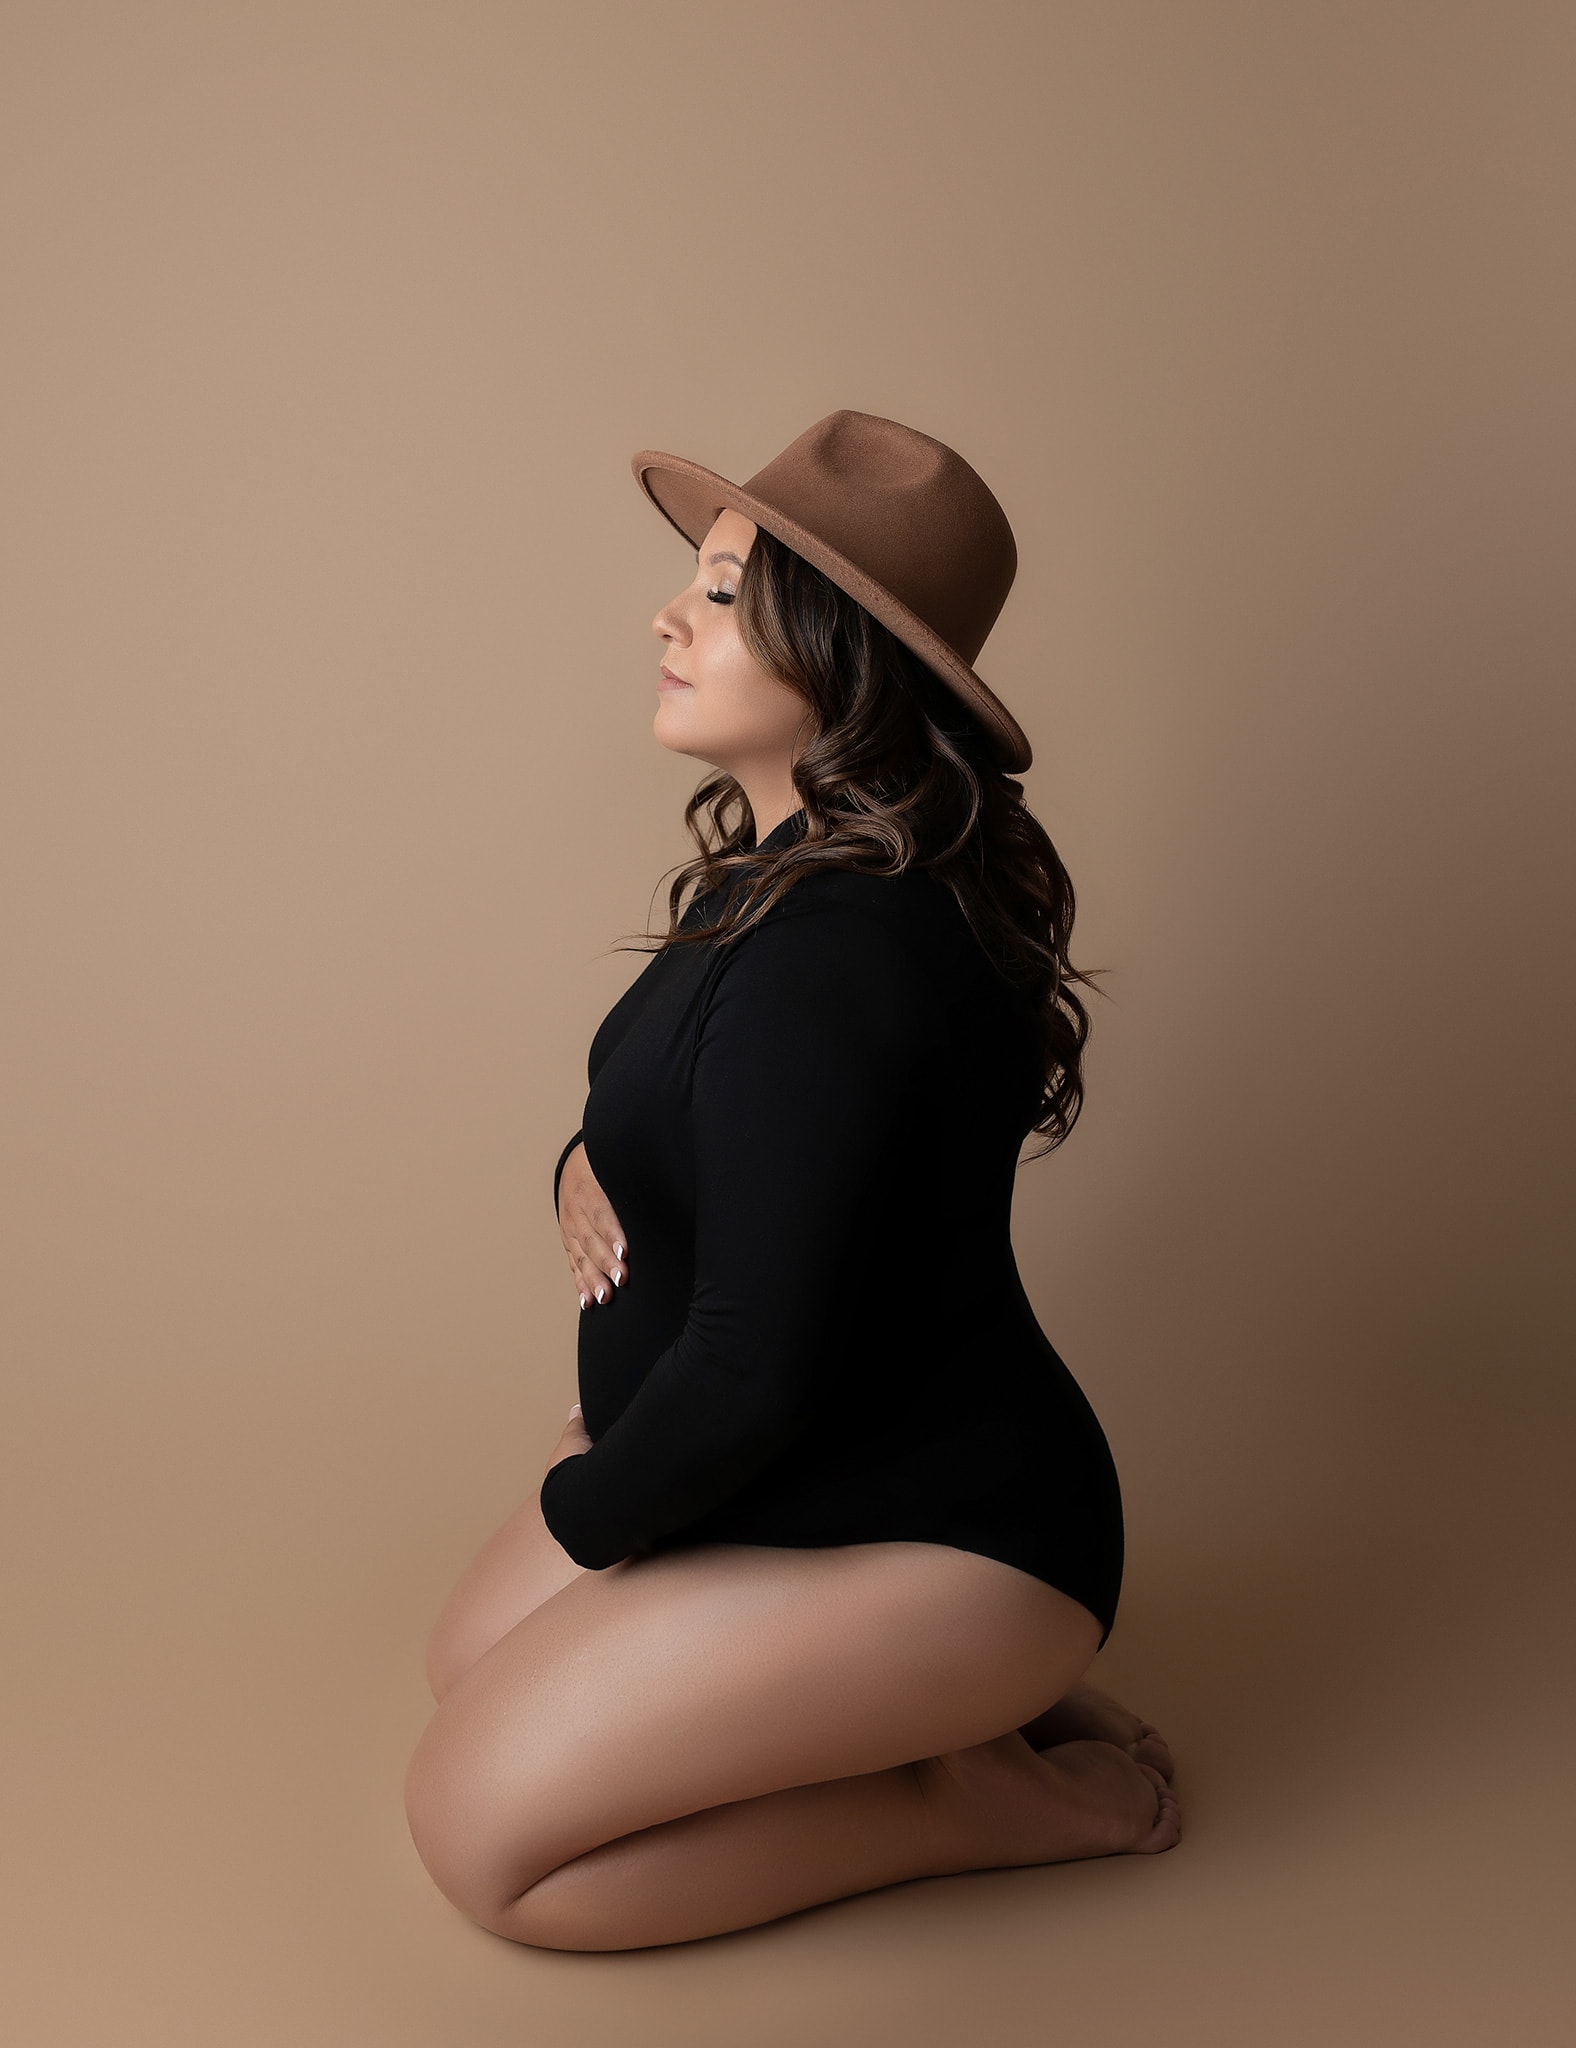 Mom to be holding her bump for her fine art portrait captured by Austin maternity photographer.